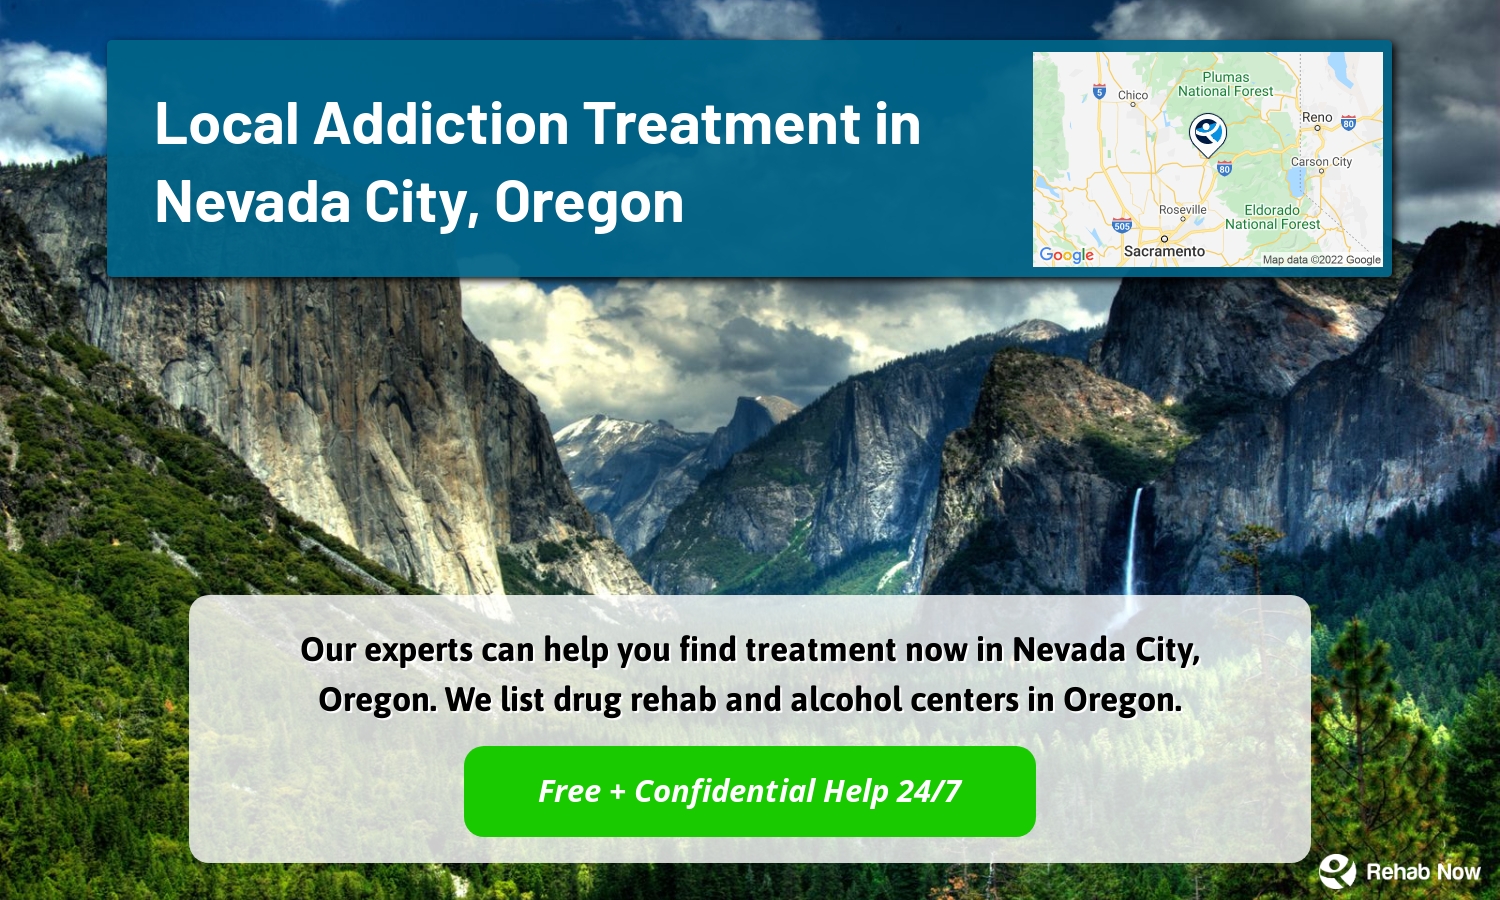 Our experts can help you find treatment now in Nevada City, Oregon. We list drug rehab and alcohol centers in Oregon.